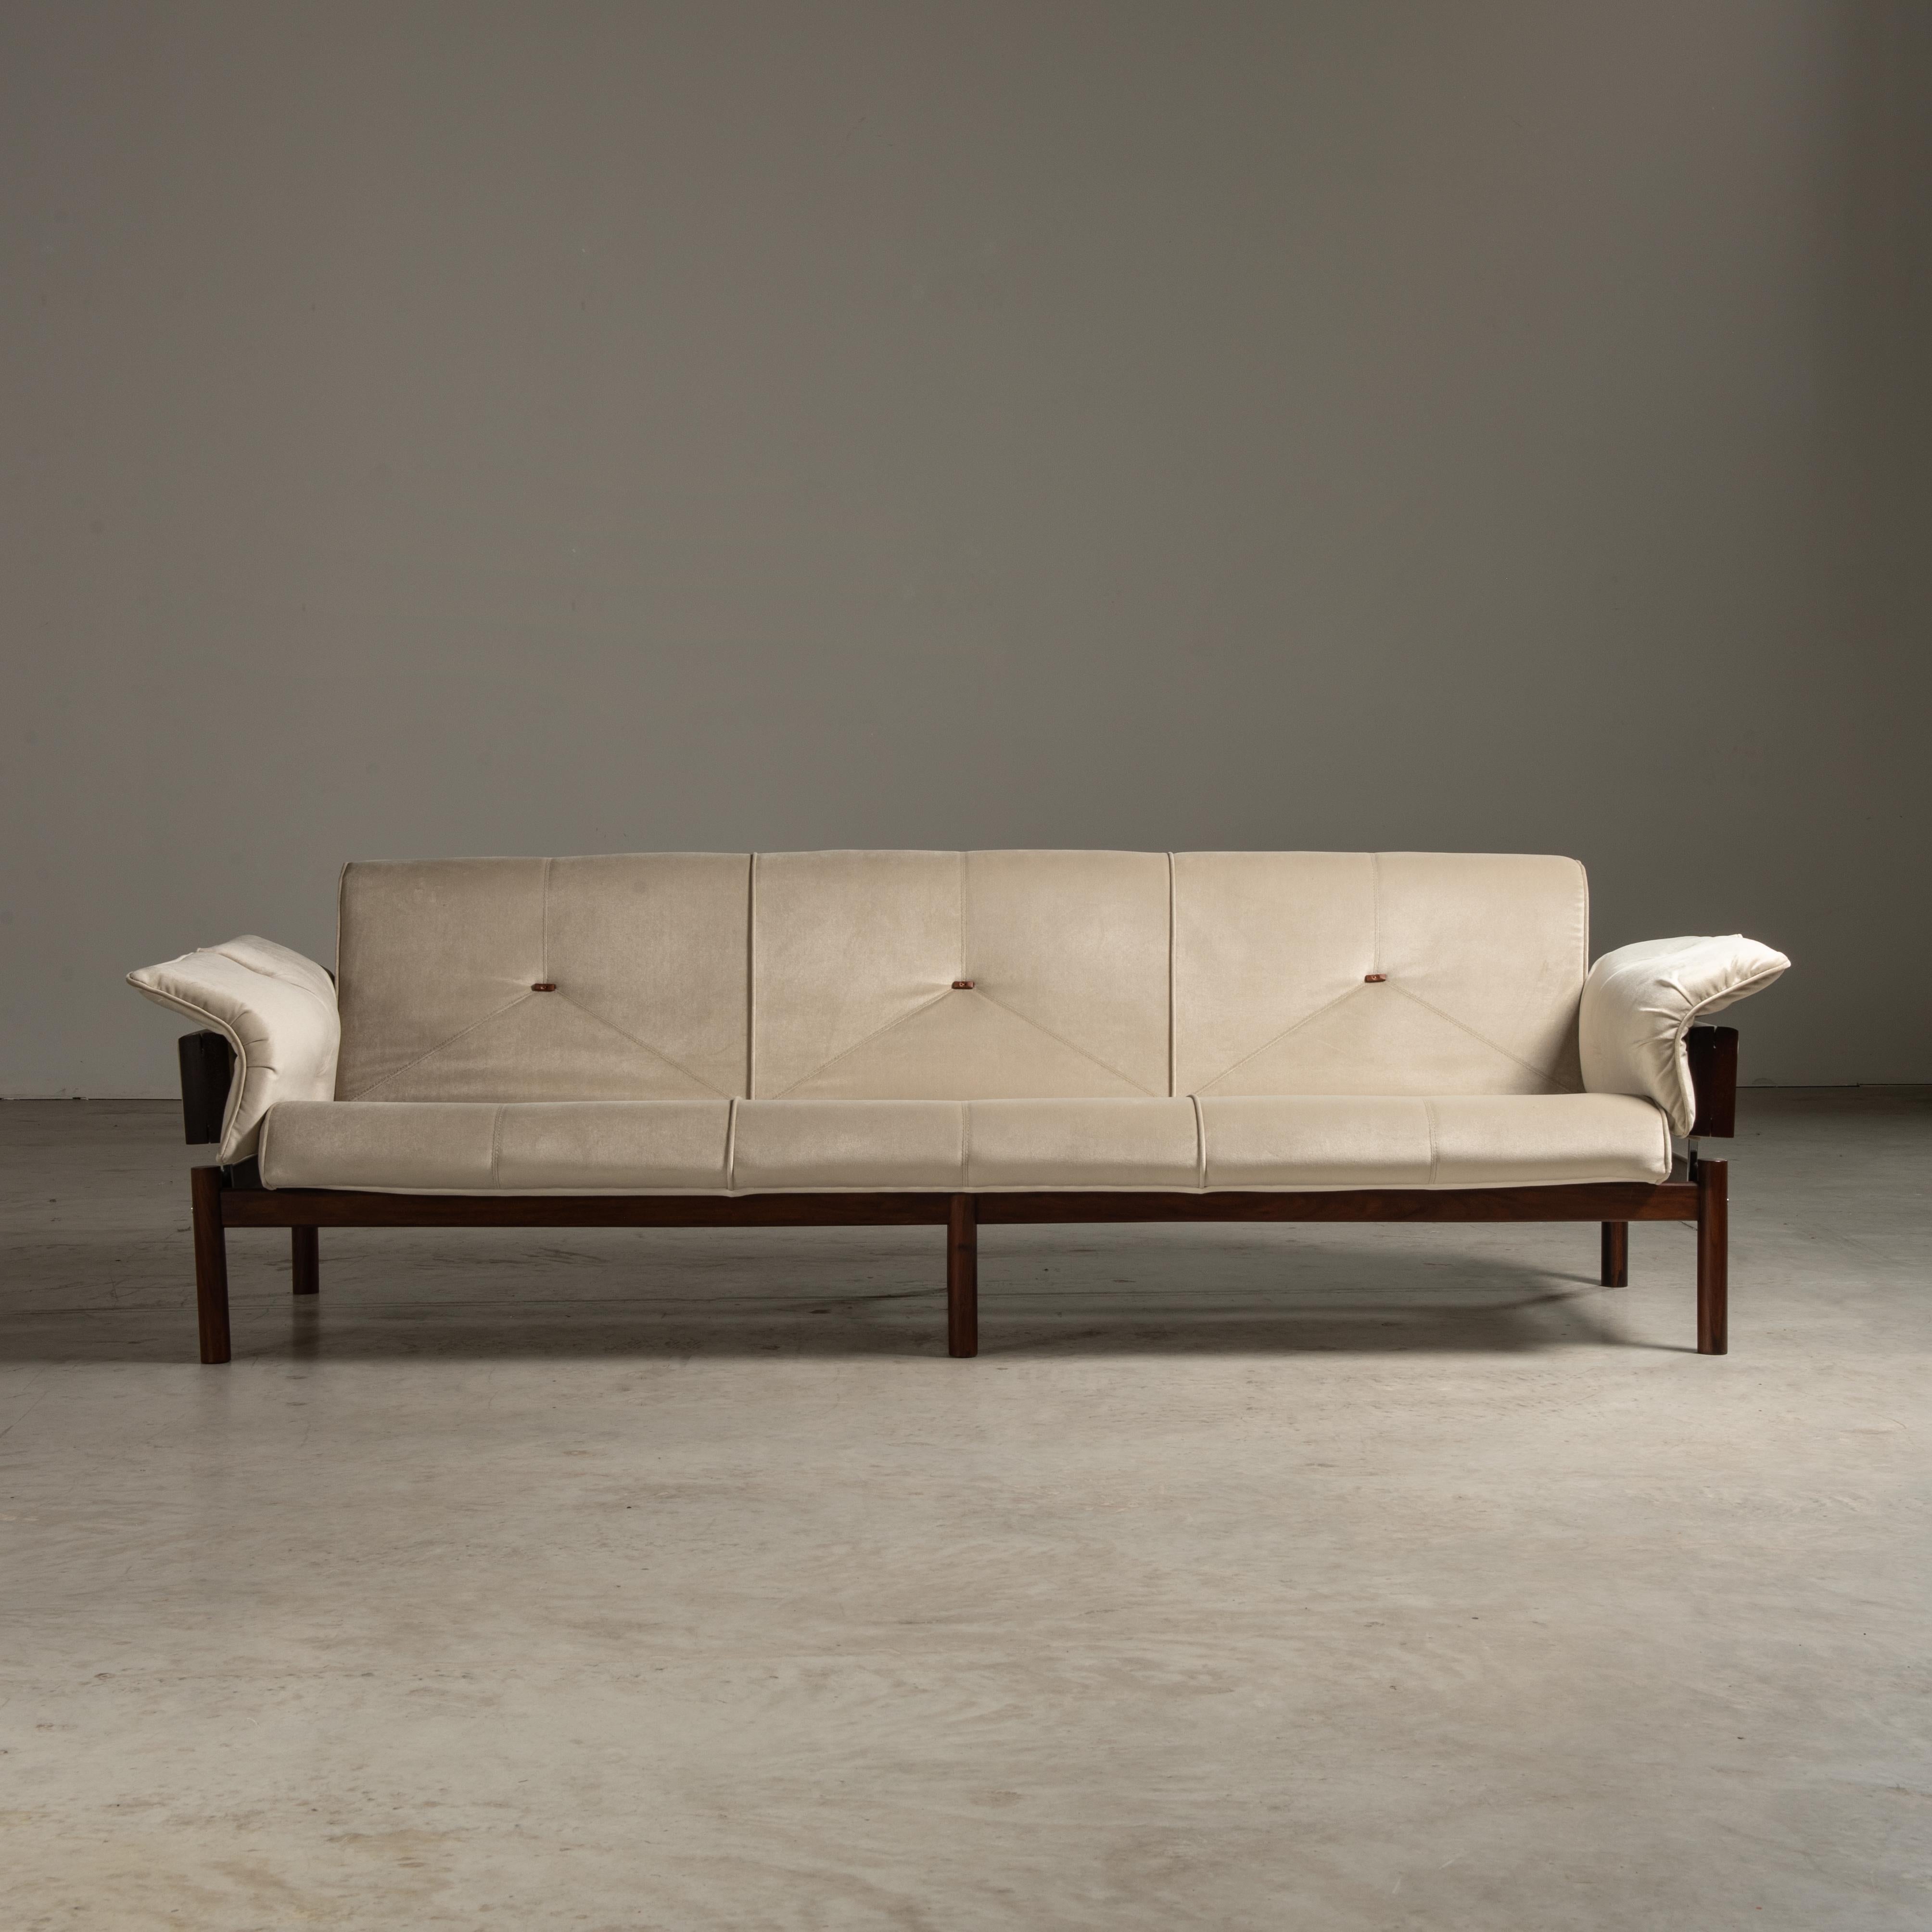 The MP-13 Sofa, designed by Percival Lafer, is a quintessential piece reflecting the Brazilian mid-century modern style, renowned for its emphasis on form, function, and the beauty of local materials. This aesthetic, which flourished from the 1940s